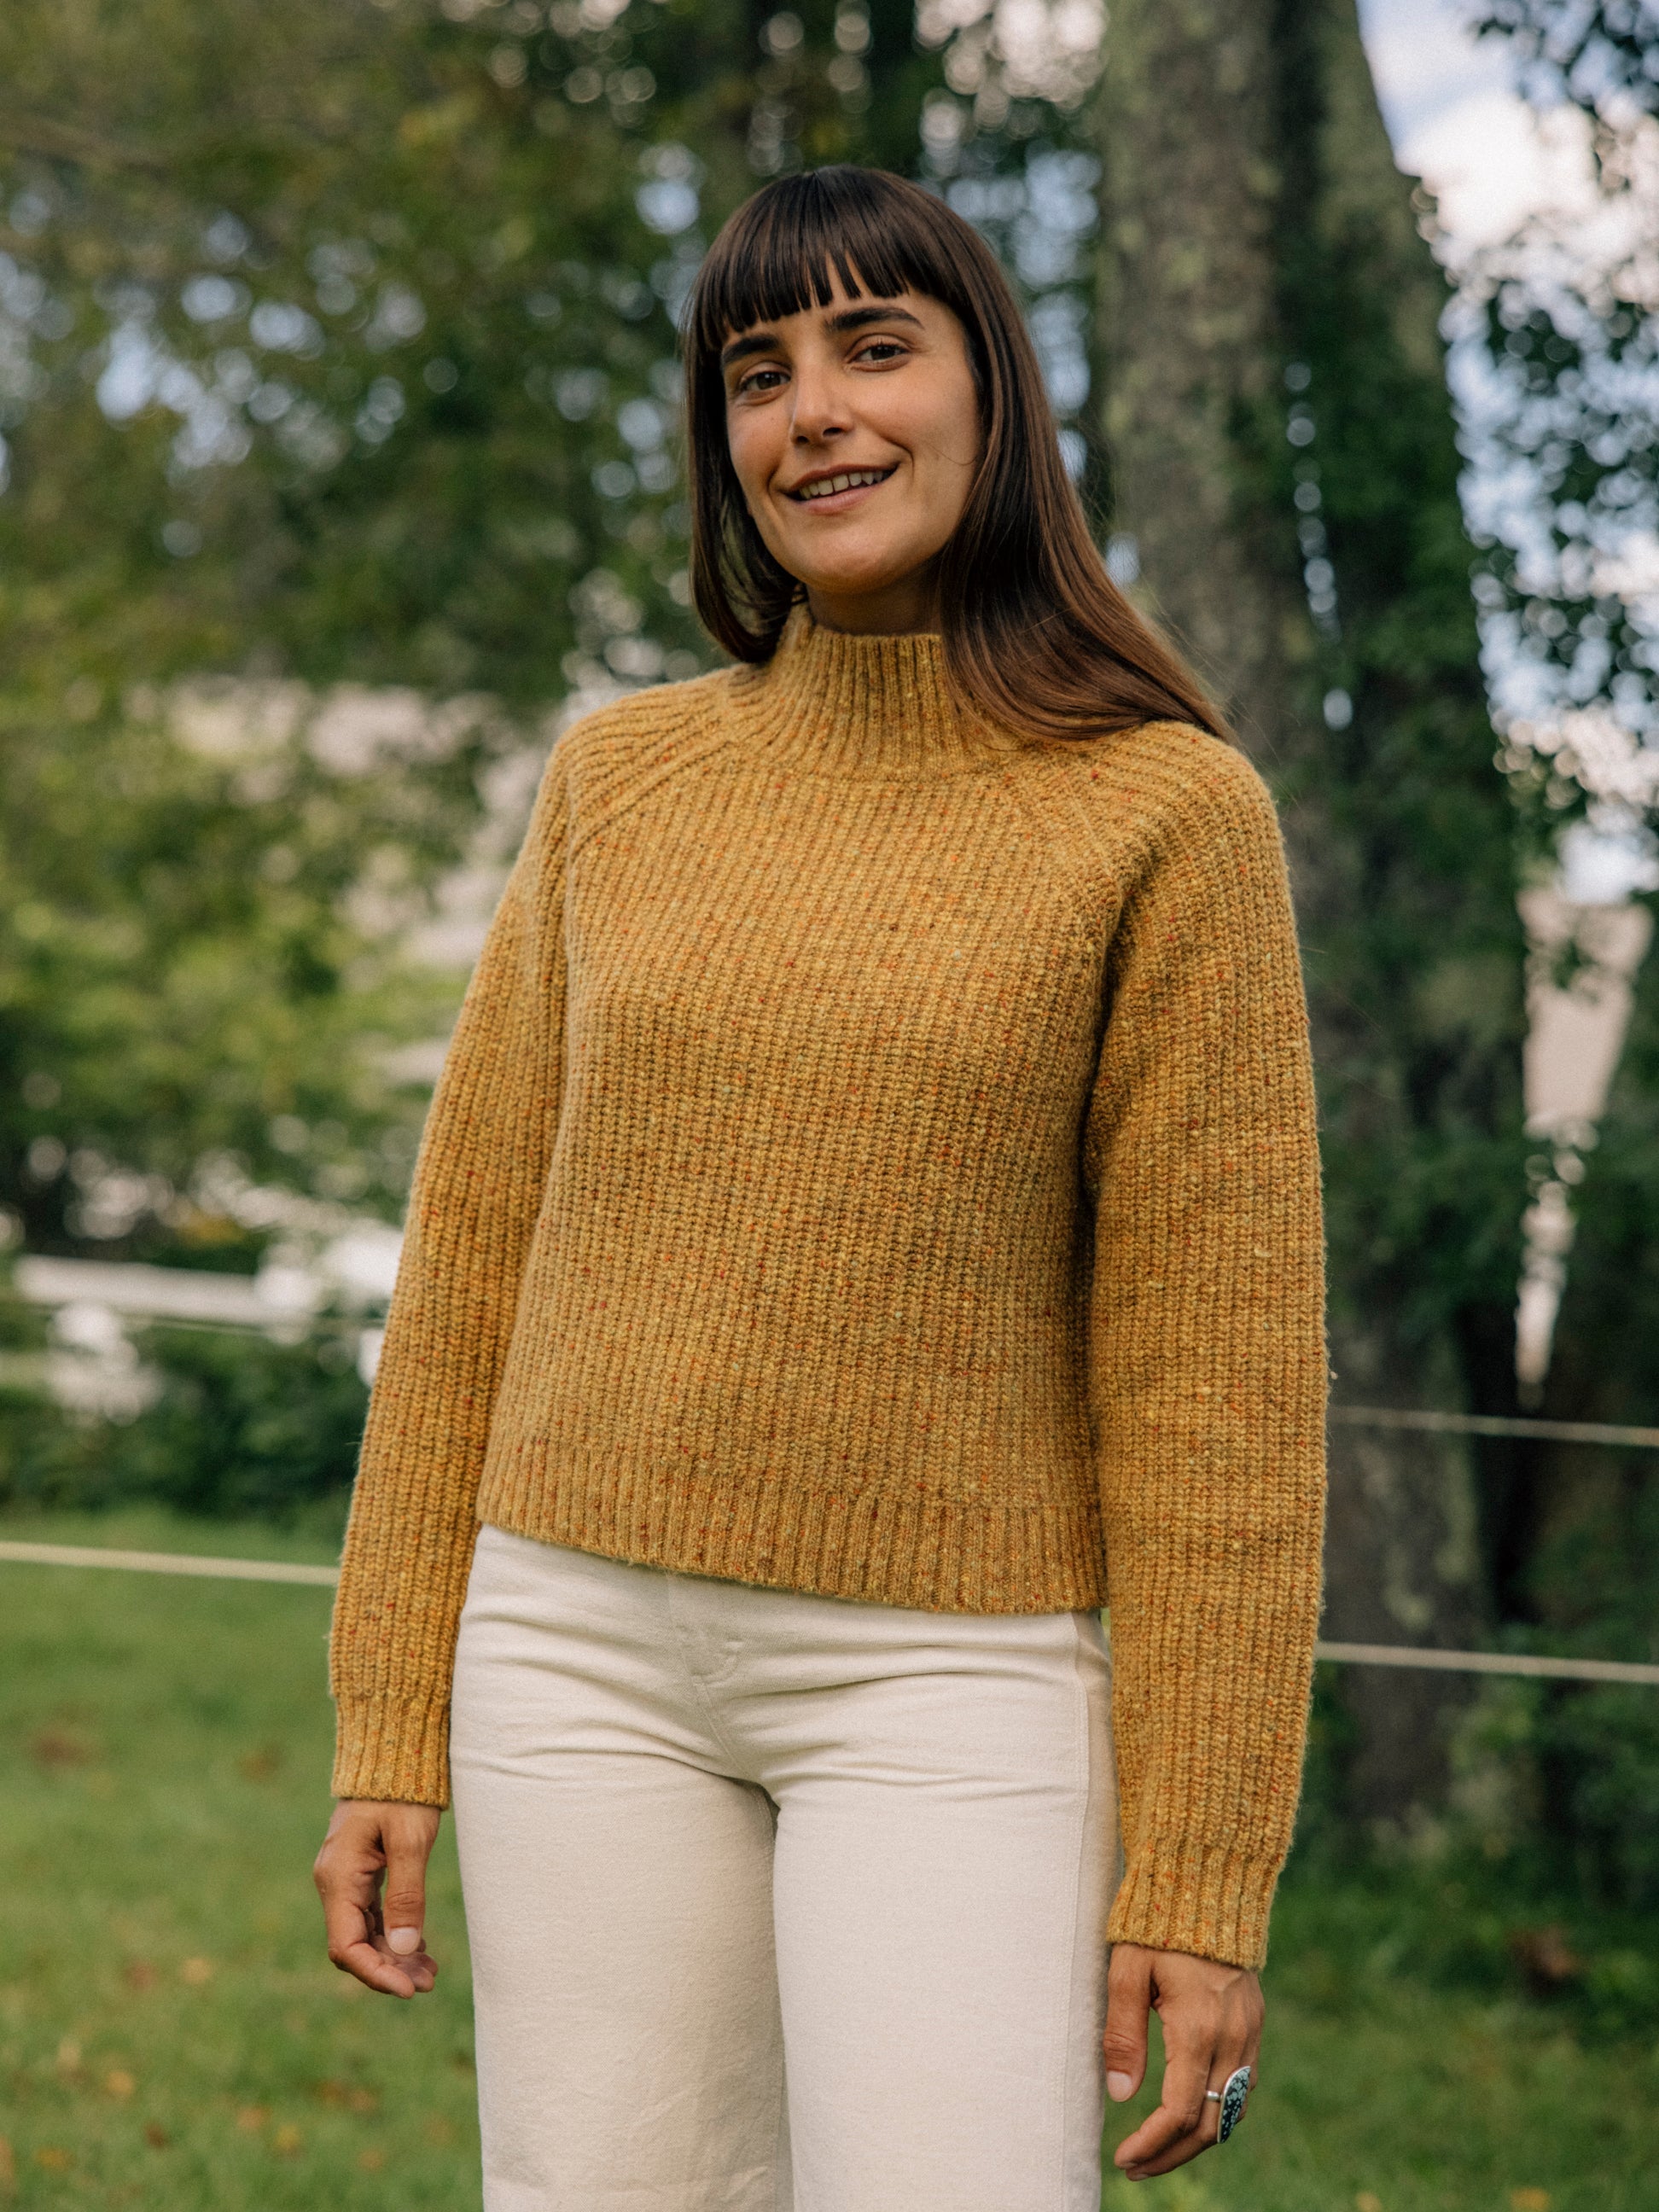 The High-Neck Teddy Pullover